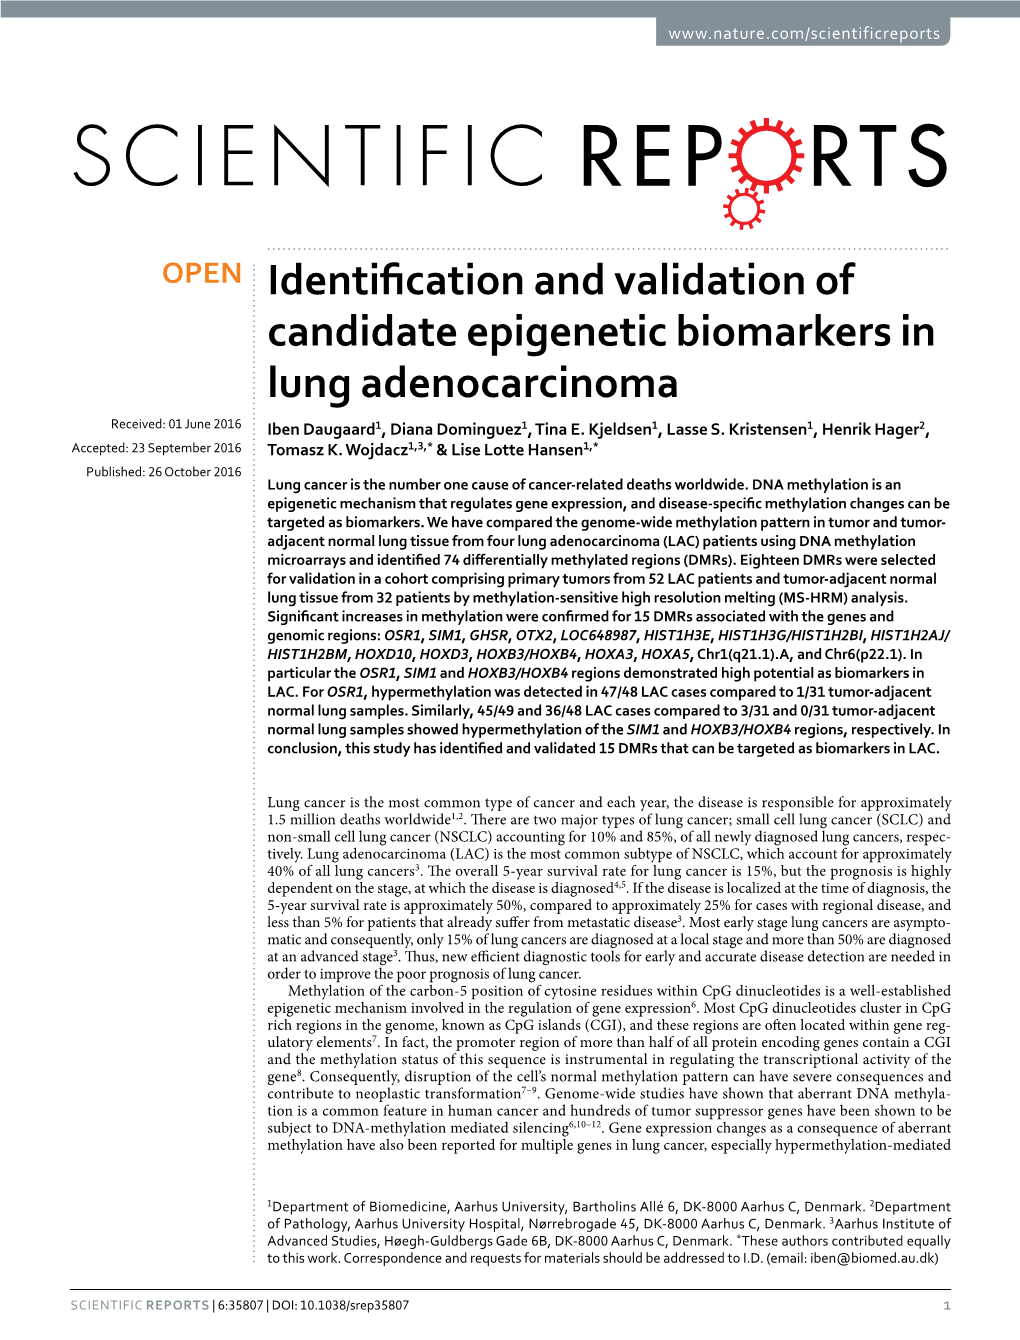 Identification and Validation of Candidate Epigenetic Biomarkers in Lung Adenocarcinoma Received: 01 June 2016 Iben Daugaard1, Diana Dominguez1, Tina E